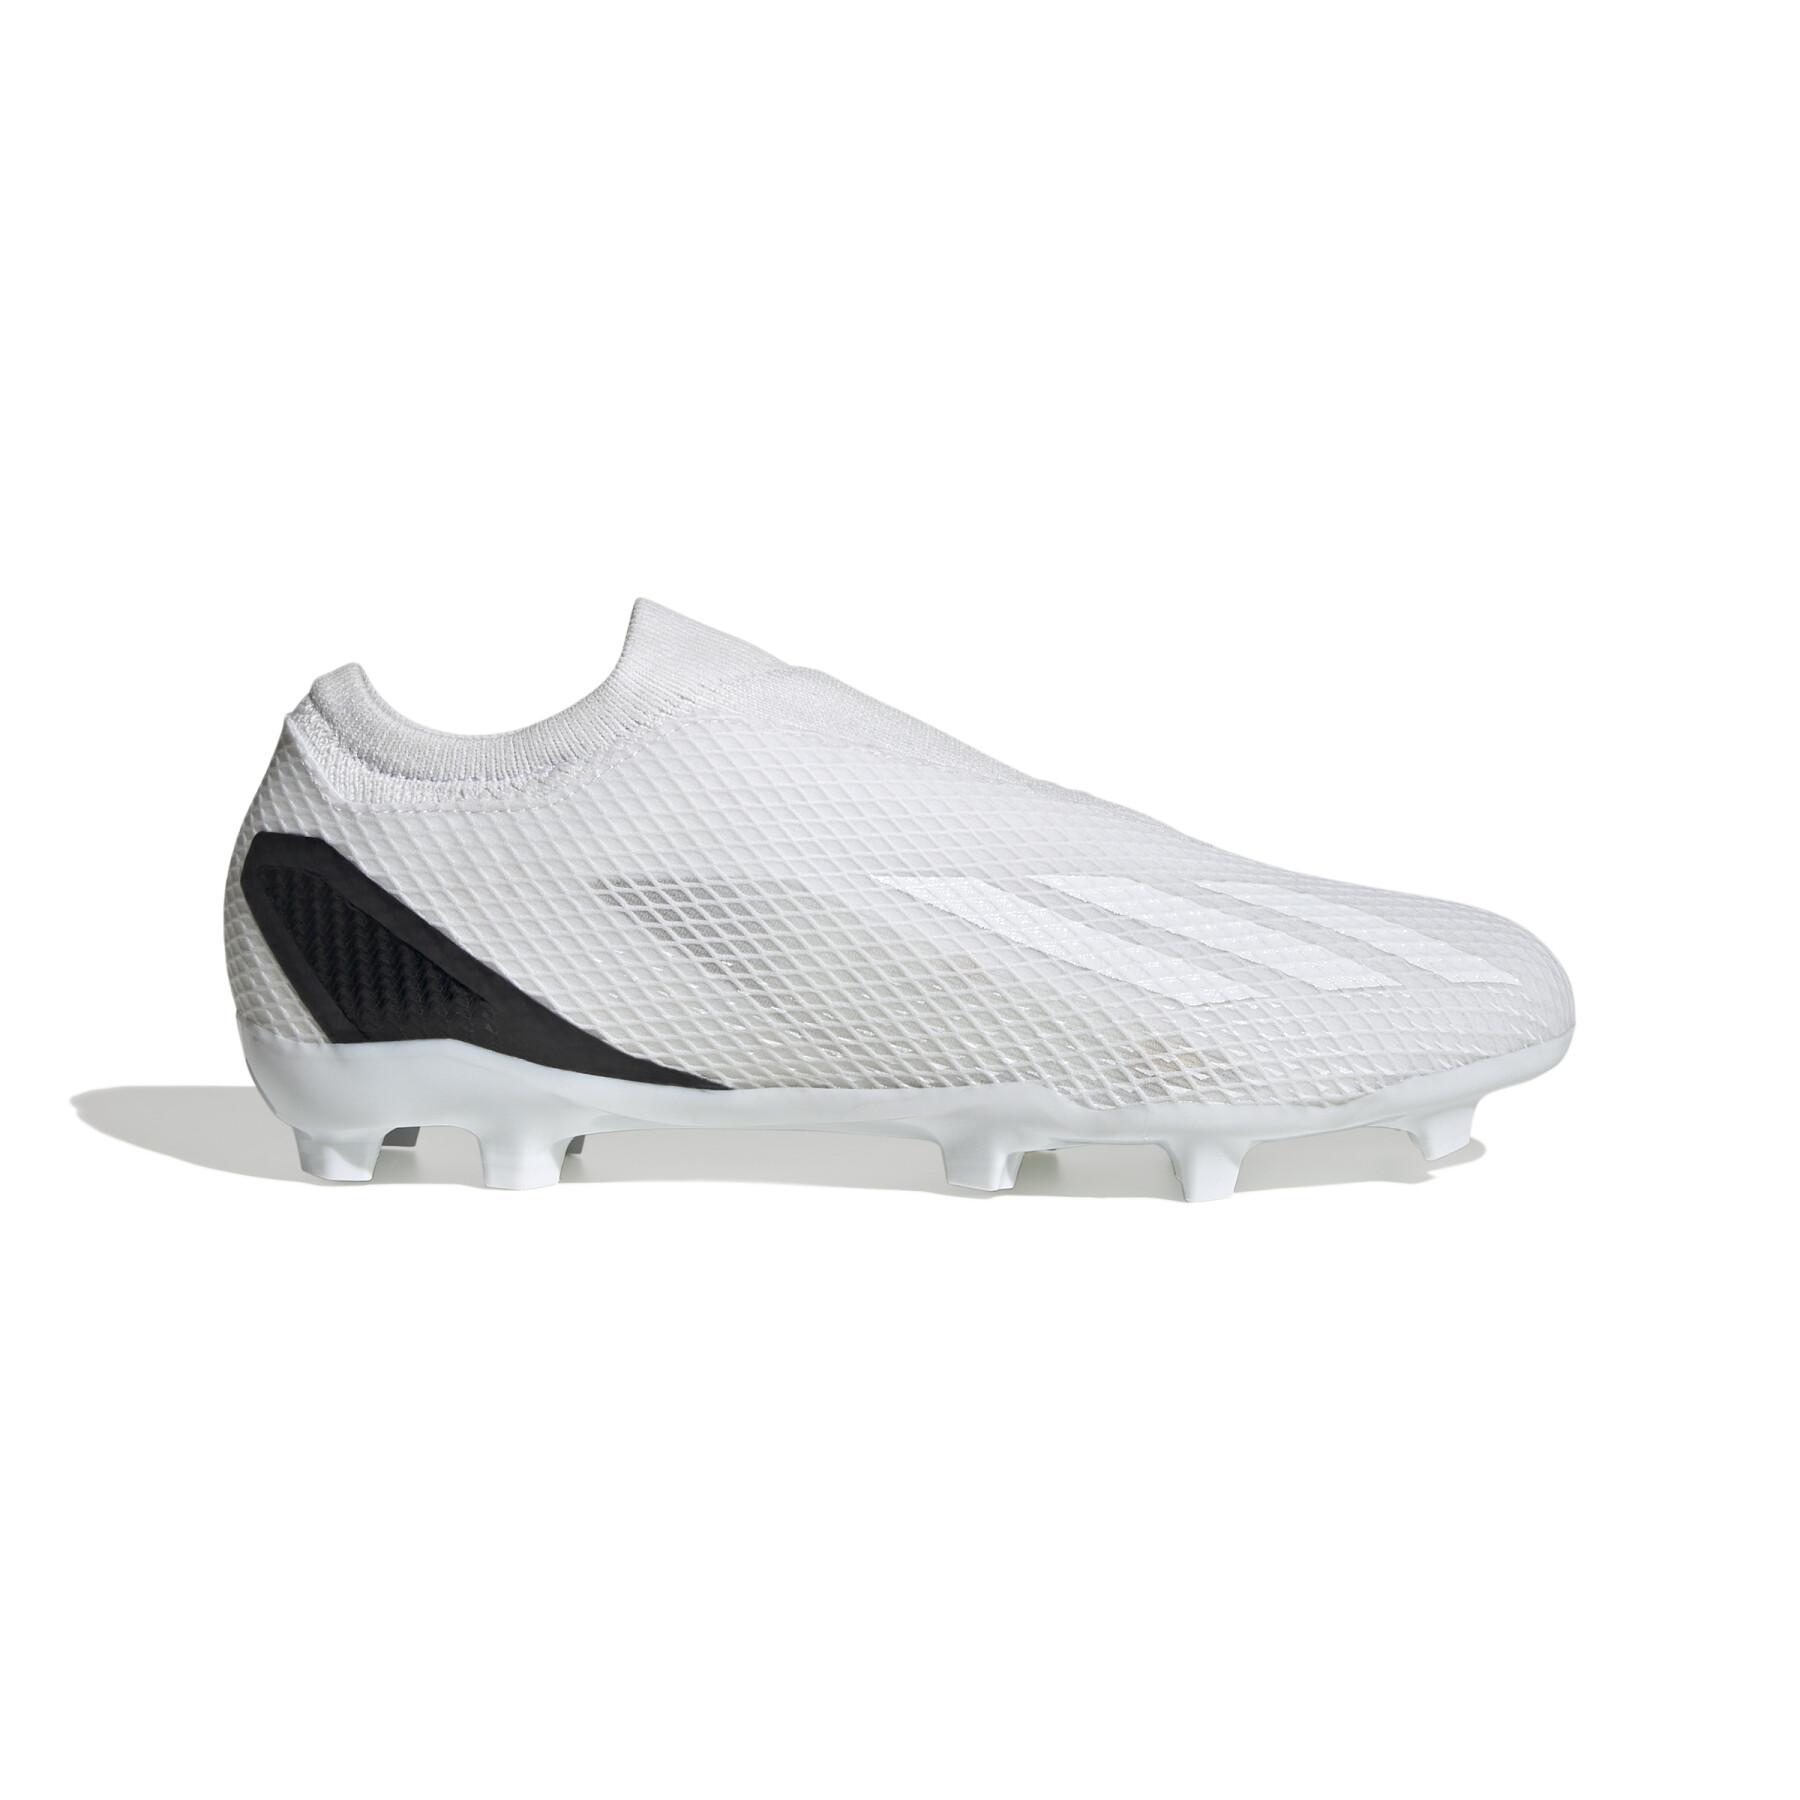 Soccer shoes without laces adidas X Speedportal.3 - Pearlized Pack